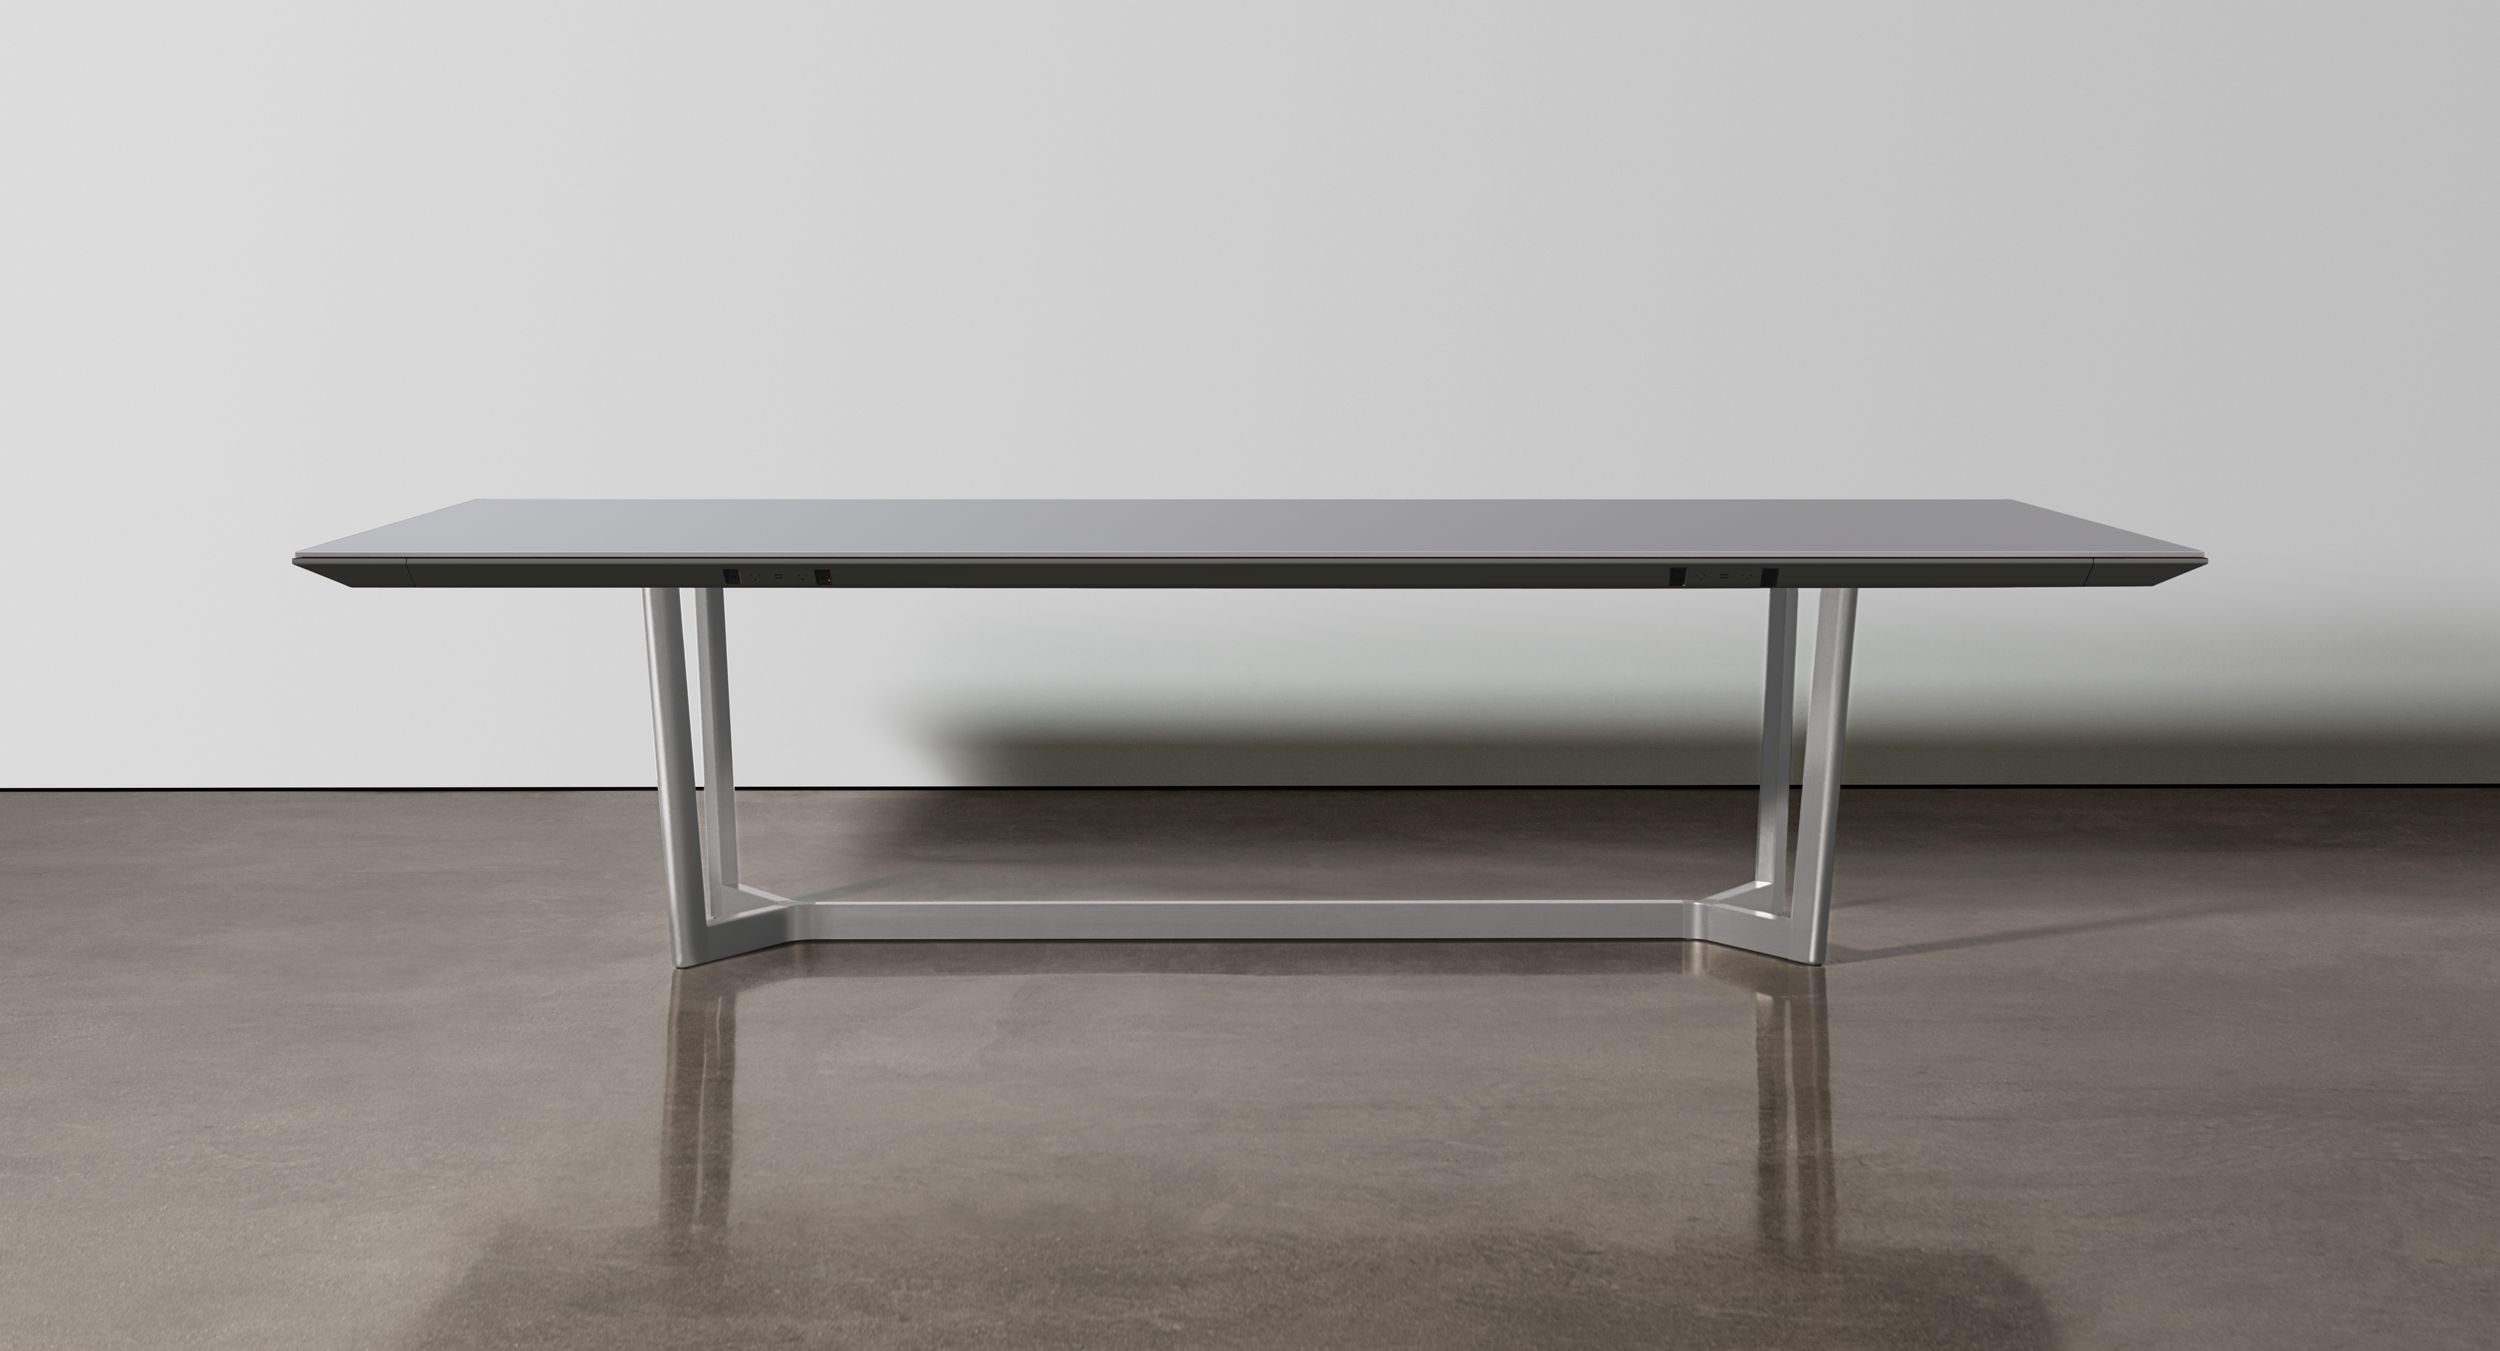 Halo table bases are offered in beautiful, brushed anodized finishes and provide concealed wire pathways to invisibly integrate technology needs.